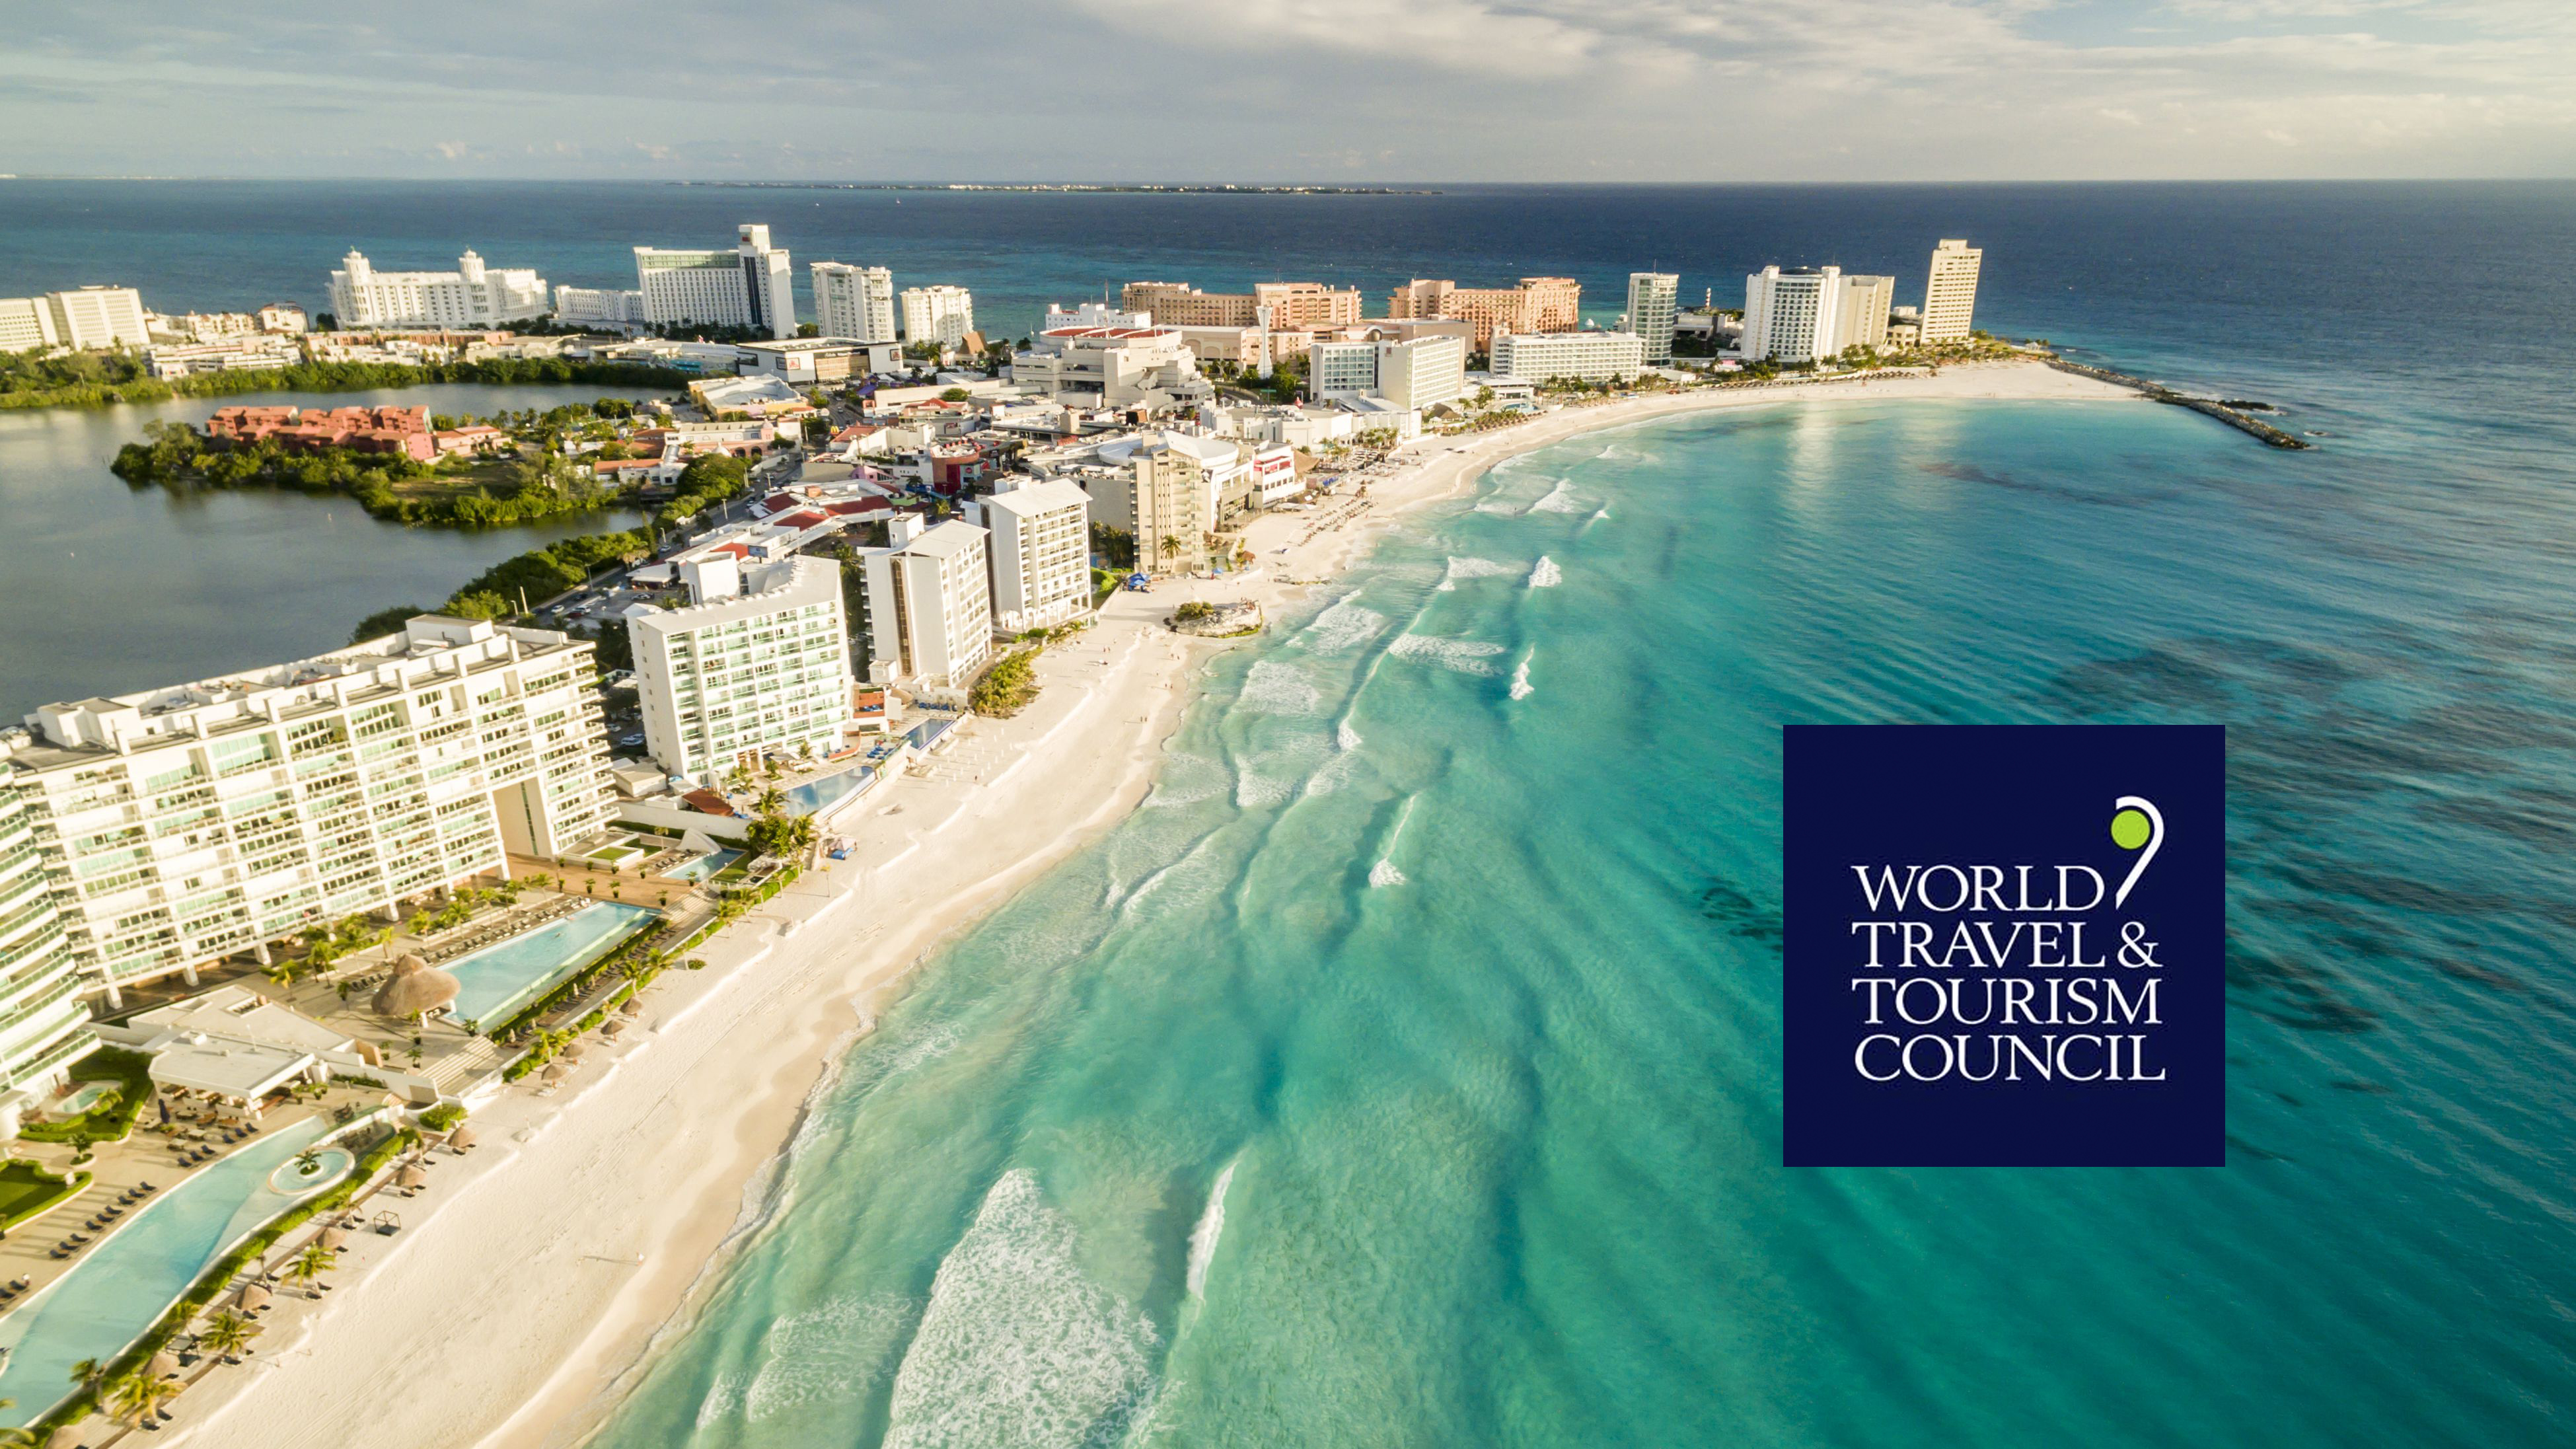 Cancun and WTTC logo